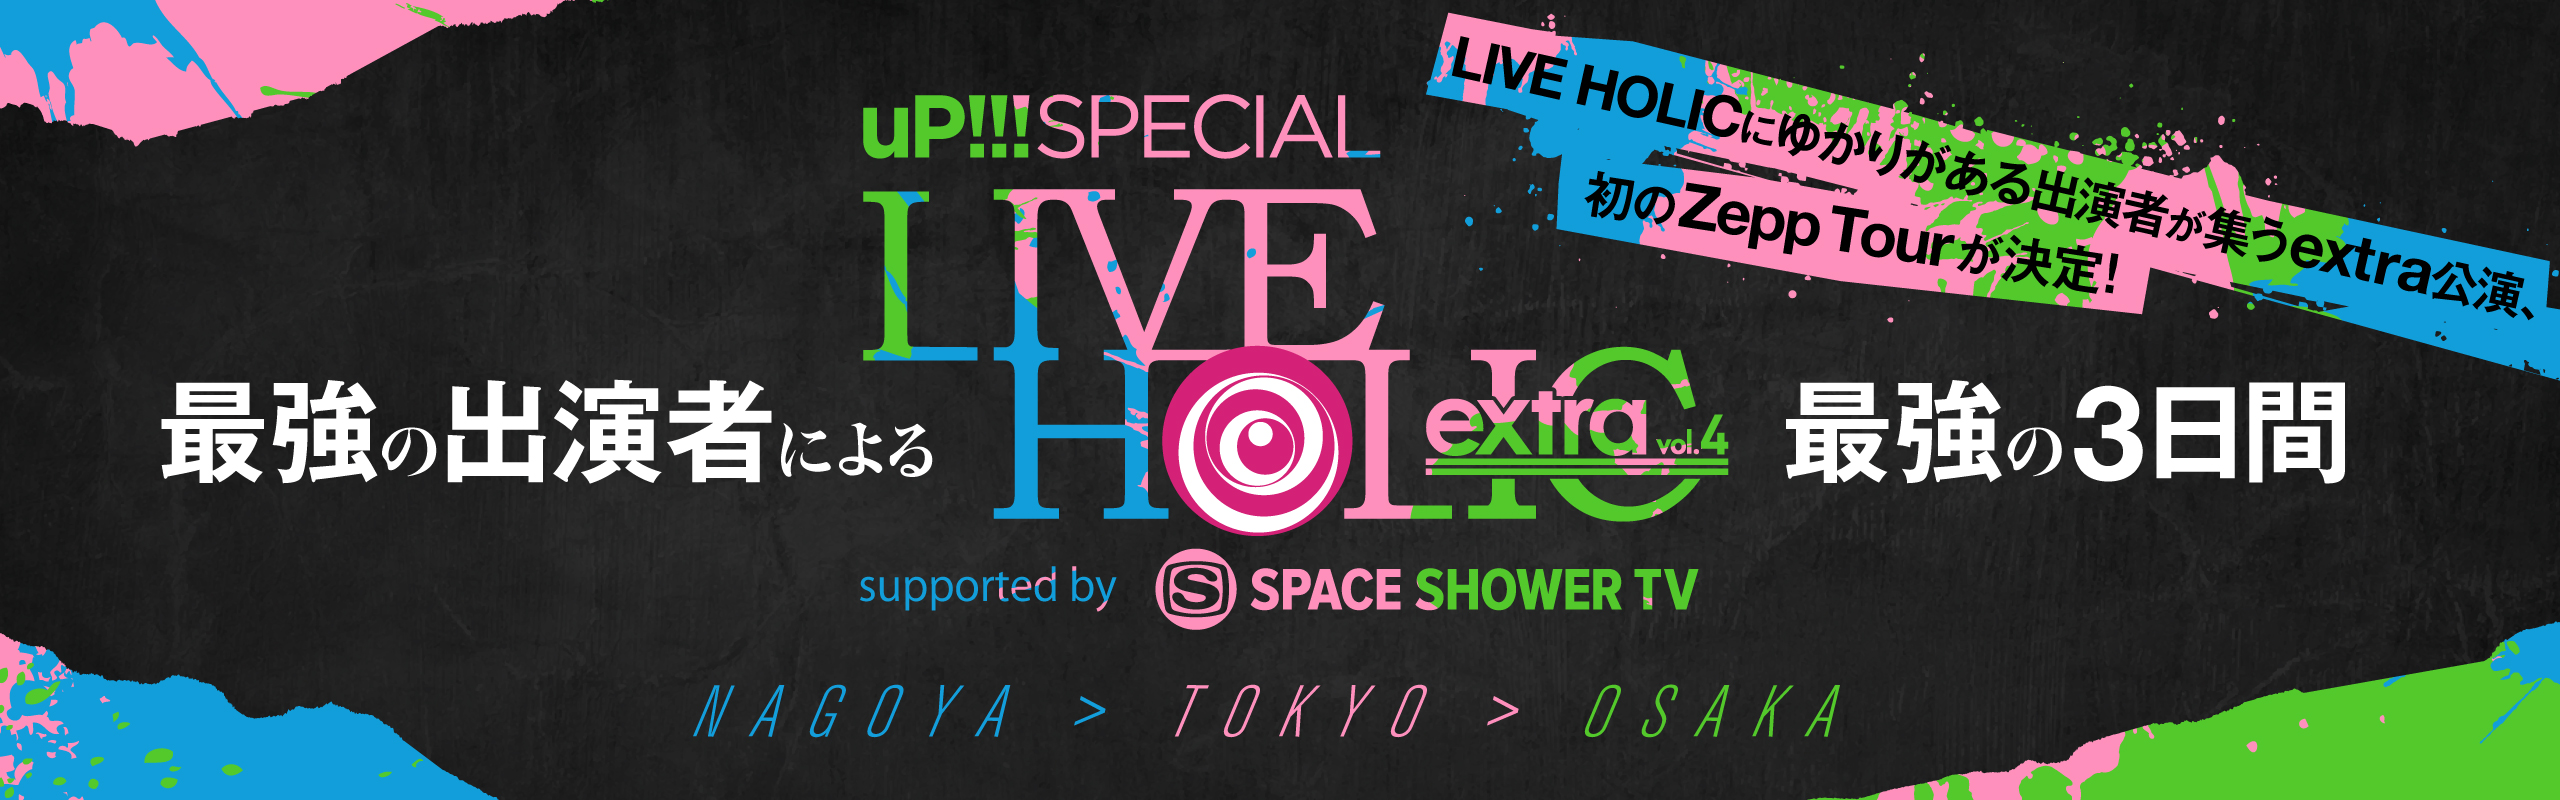 up!!! SPECIAL LIVE HOLIC extra vol.4 supported by SPACE SHOWER TV 最強の出演者による最強の3日間 過去の出演者が集うextra公演、初のZepp Tourが決定！ NAGOYA TOKYO OSAKA